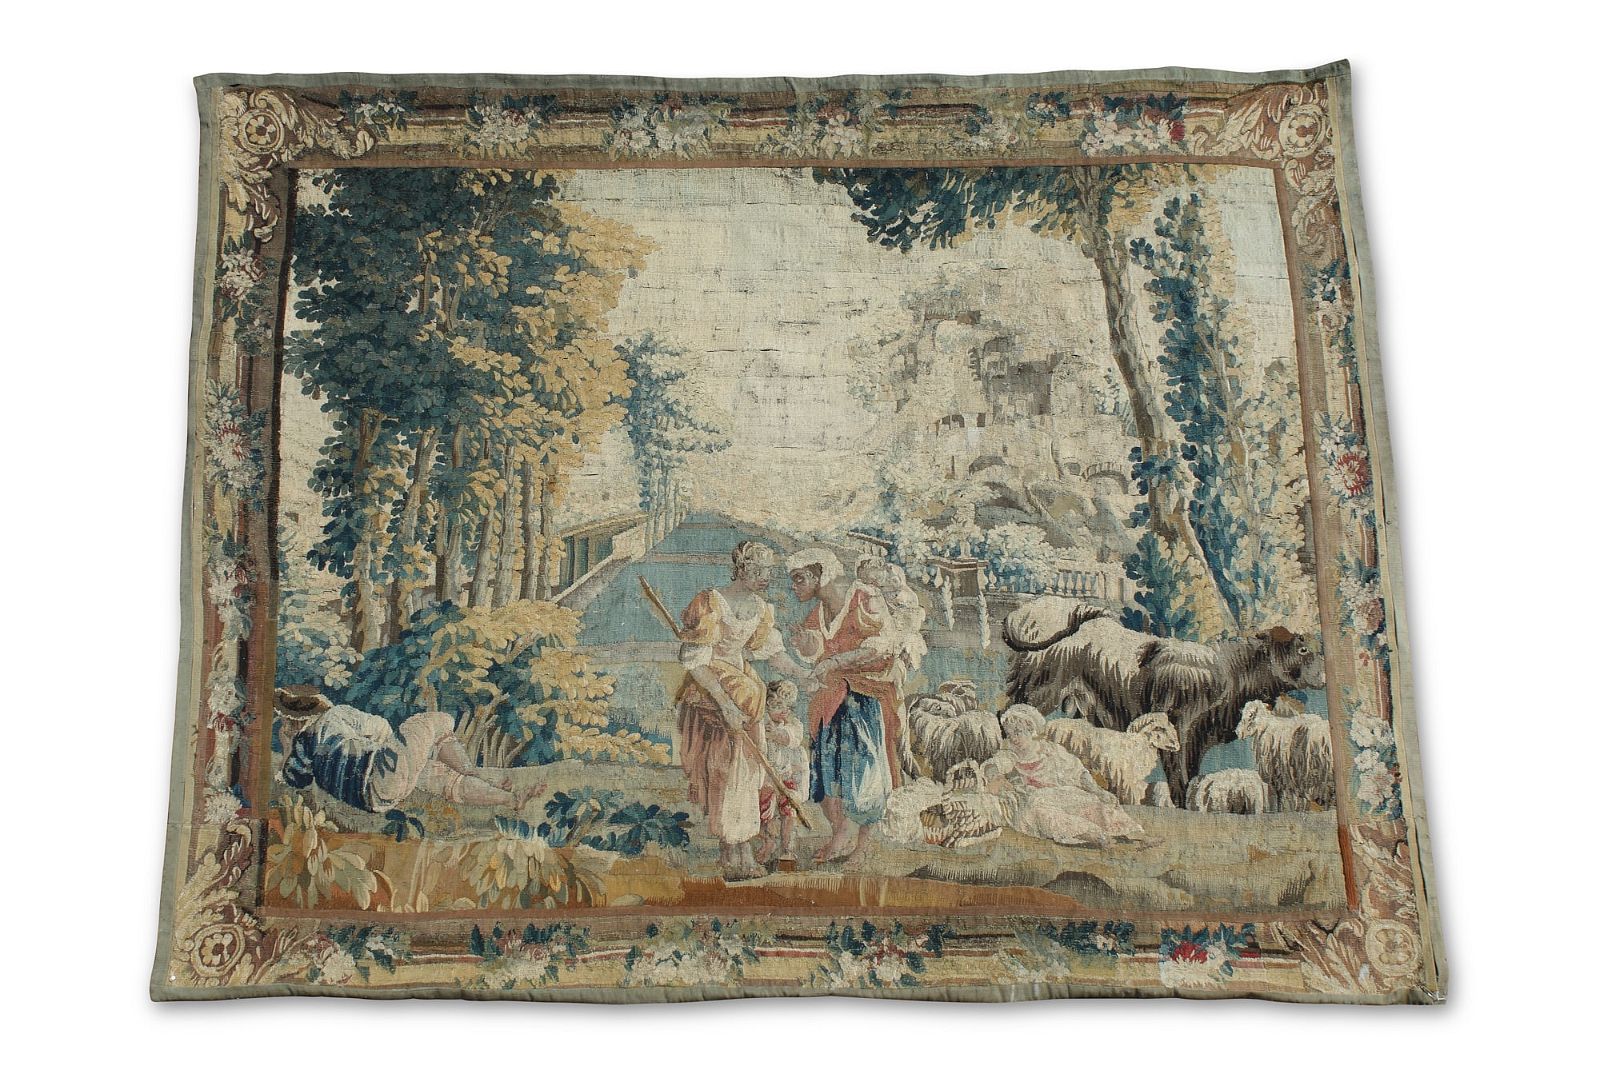 A FLEMISH BAROQUE TAPESTRY, LATE